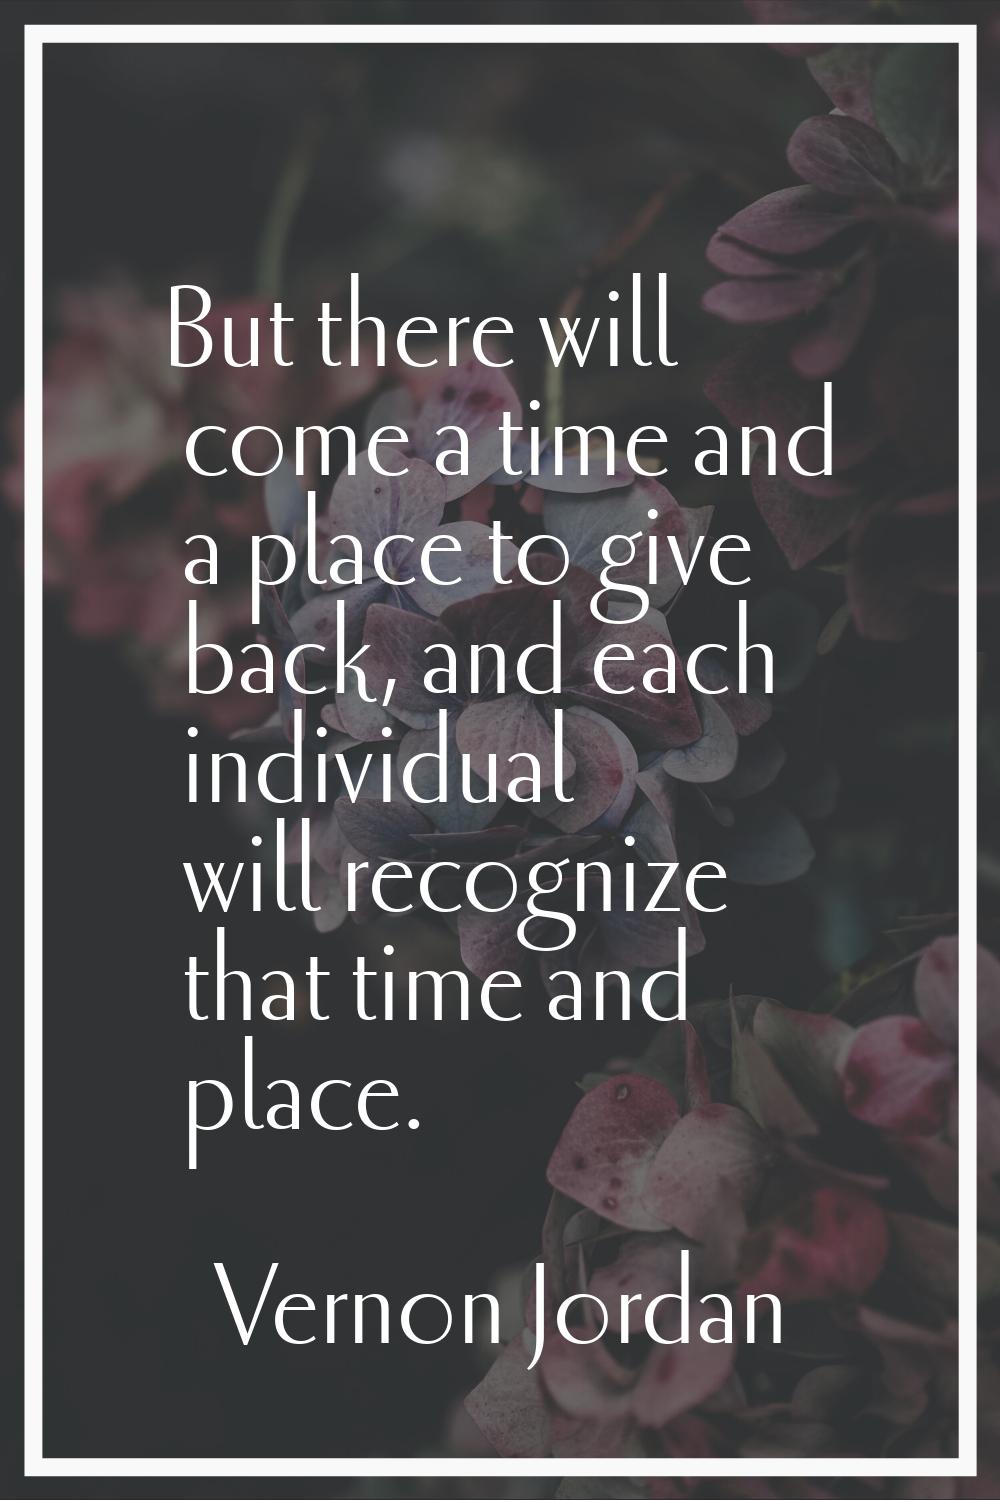 But there will come a time and a place to give back, and each individual will recognize that time a